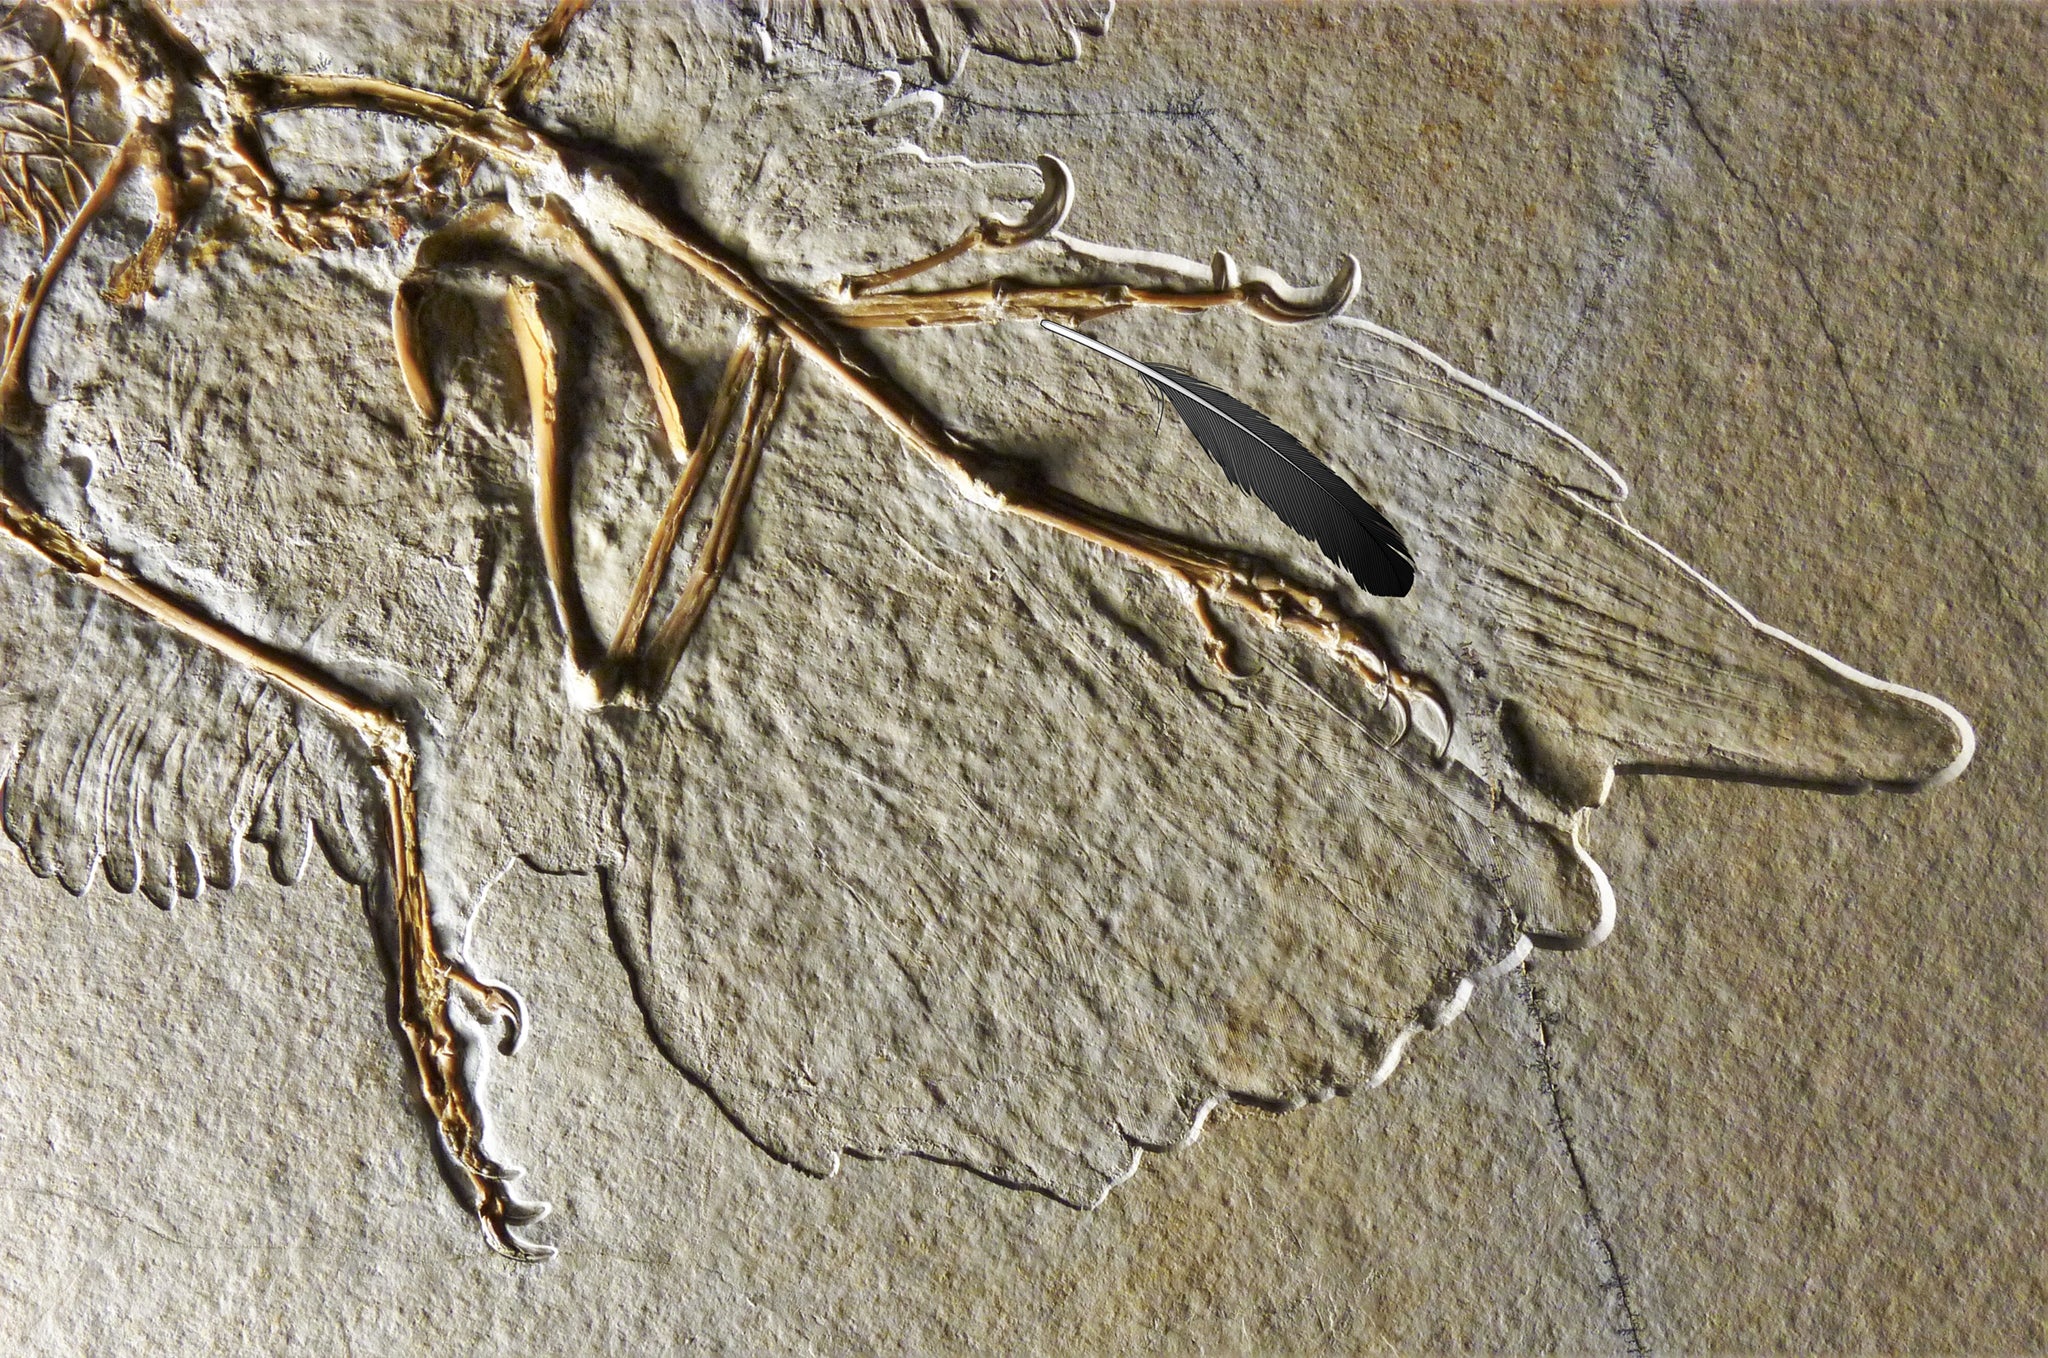 The right wing of the Altmuhl archaeopteryx fossil. The top surface of the wing has feathers that are identical in shape and size to a specimen found in 1861, researchers say